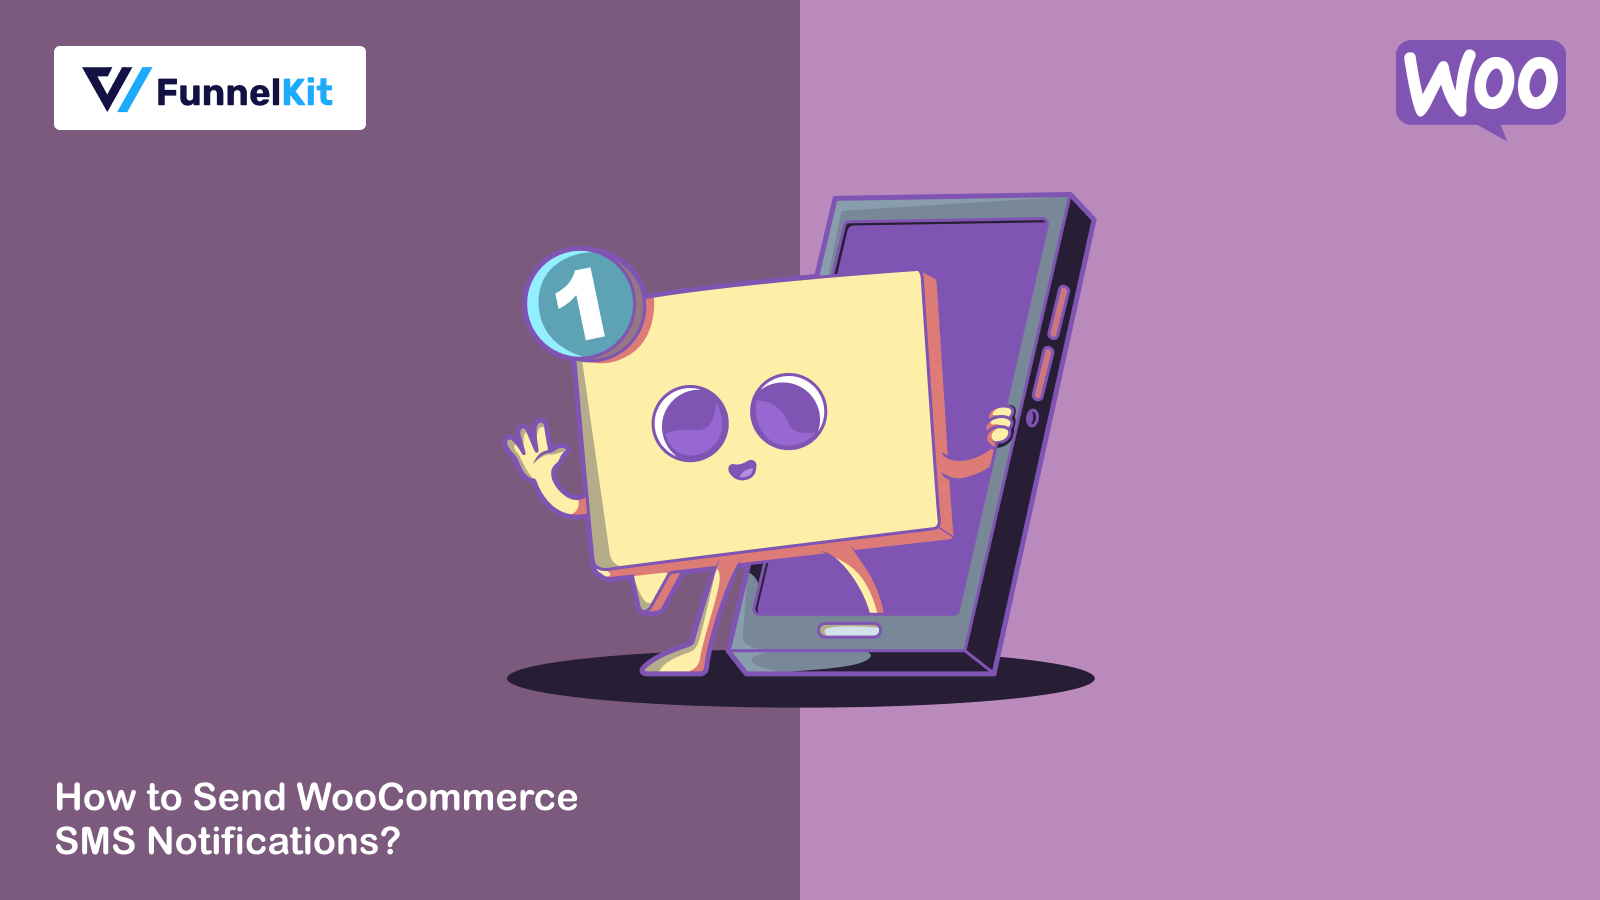 How to Send WooCommerce SMS Notifications?